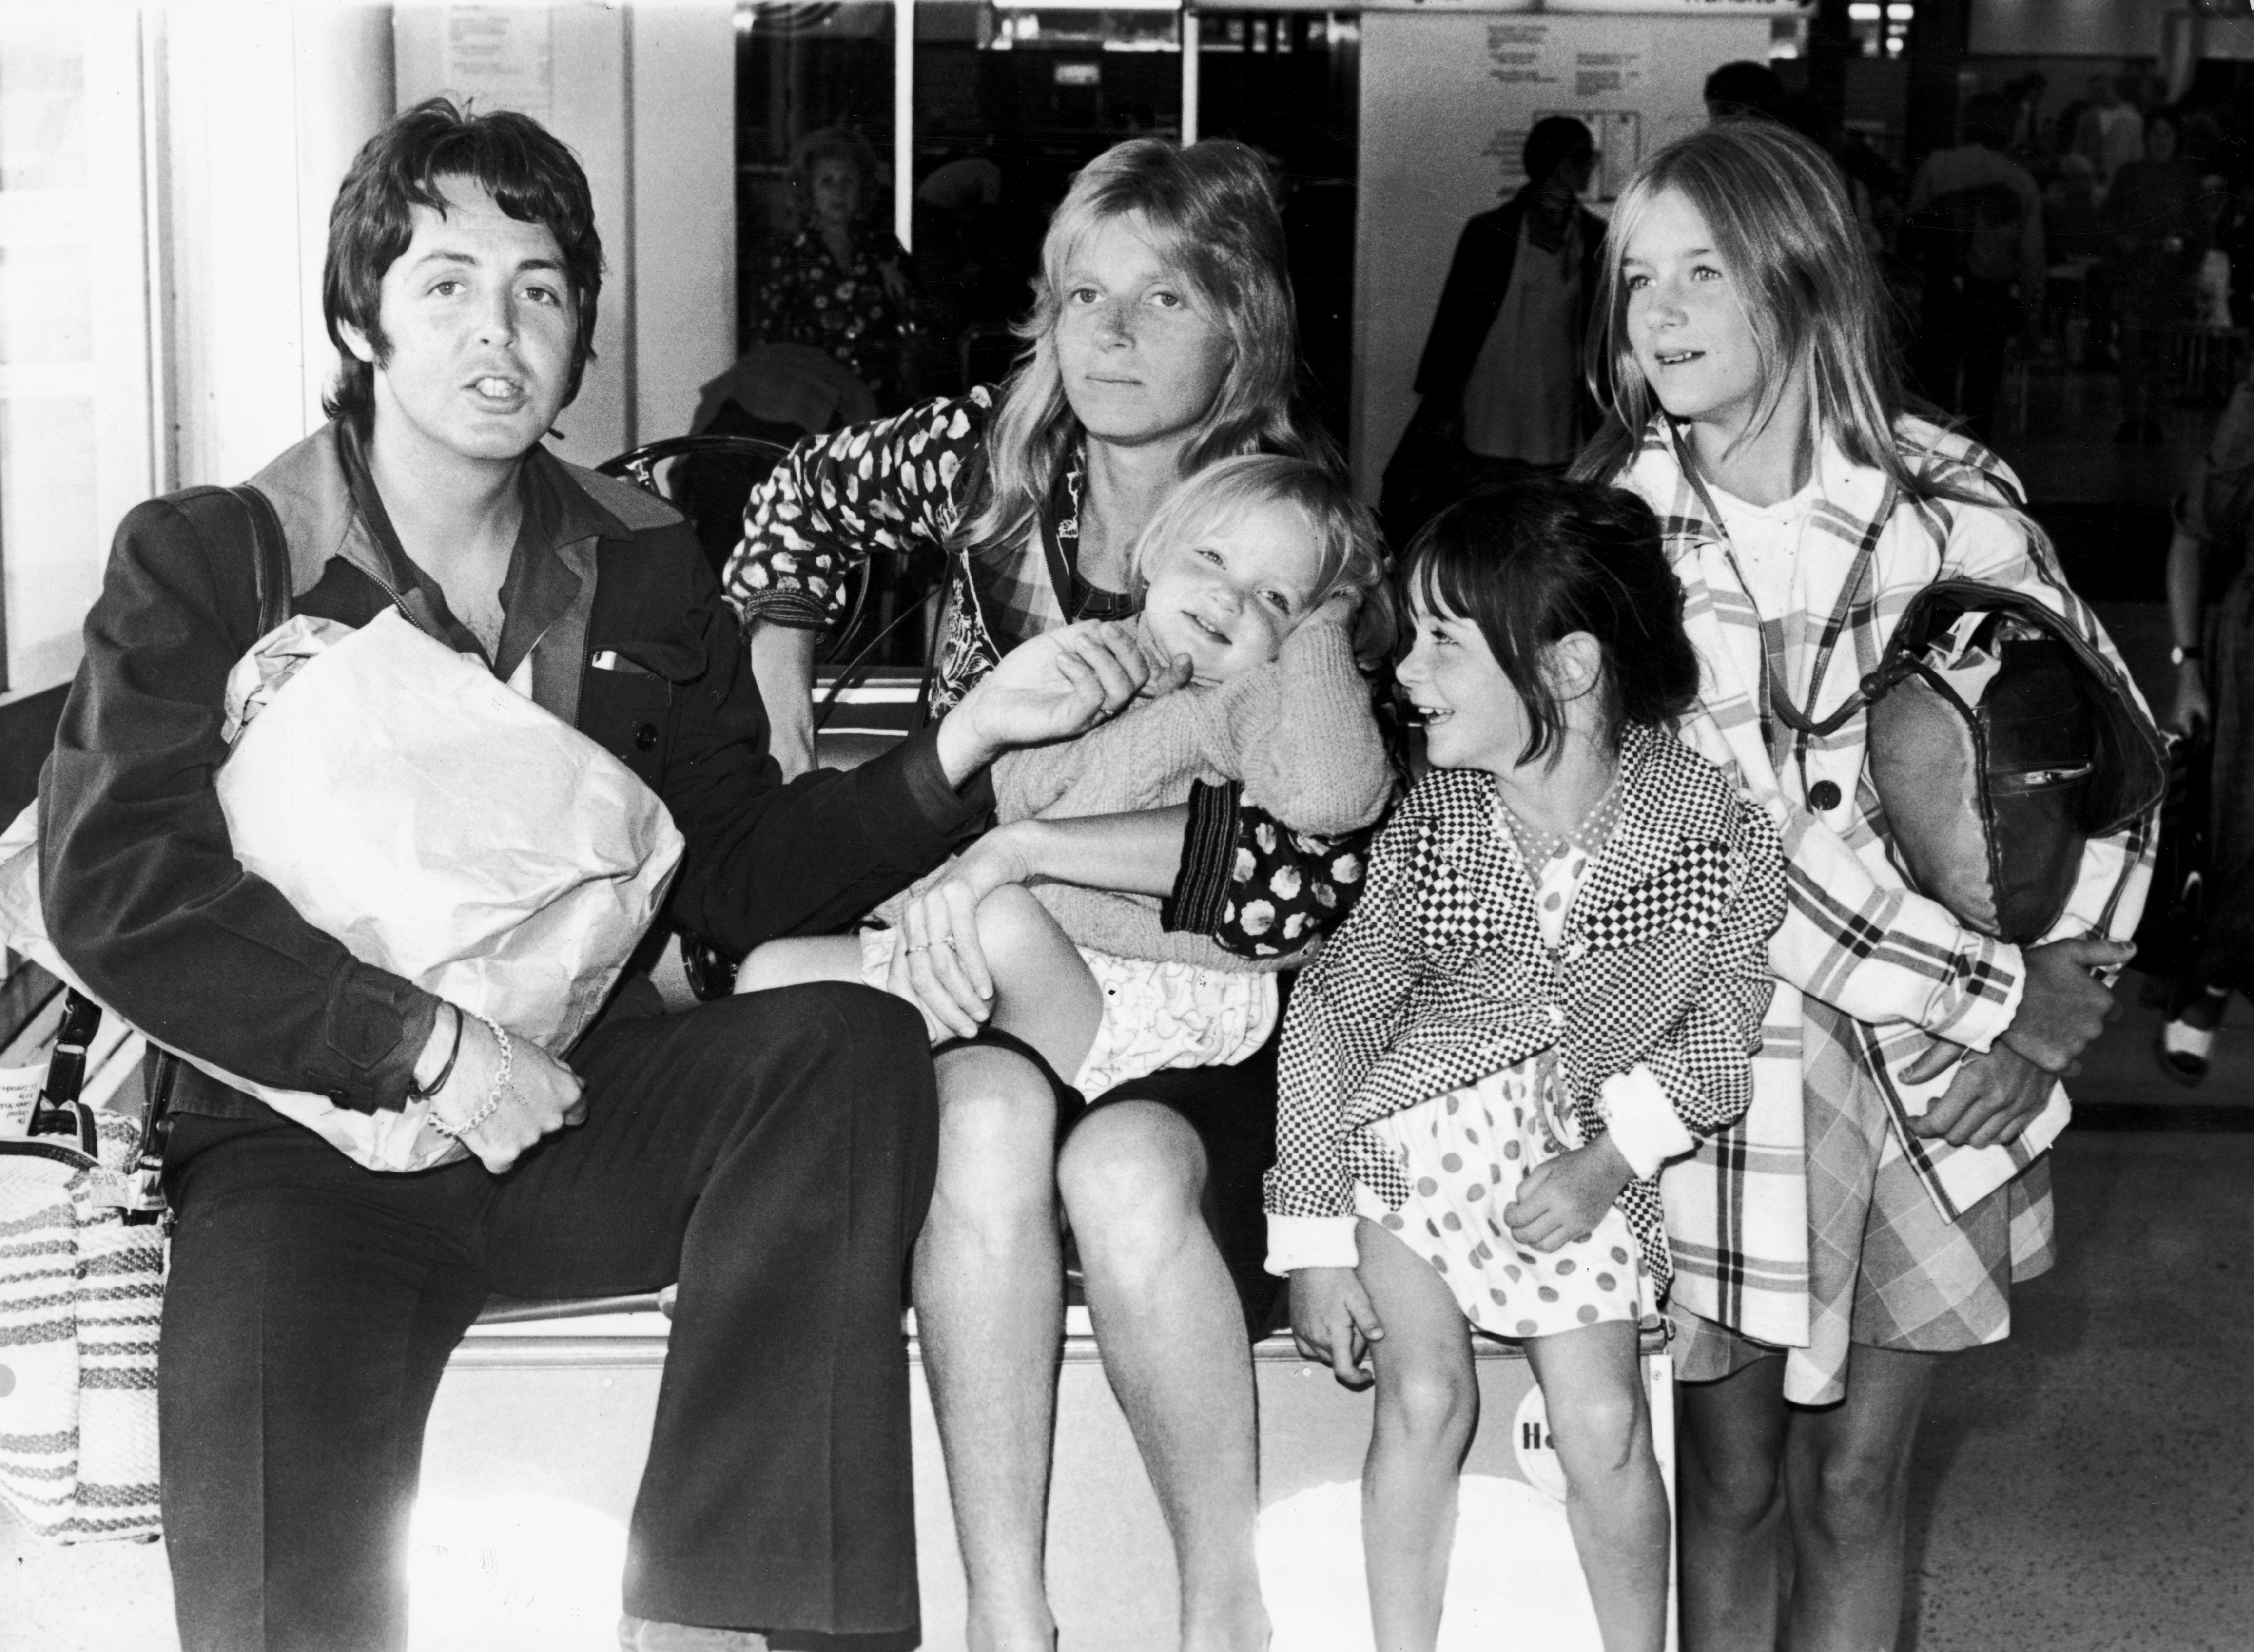 Paul McCartney poses with his wife Linda McCartney, and their daughters, Stella, Mary, and Heather, on August 2, 1974, in Heathrow Airport in London, England. | Source: Getty Images